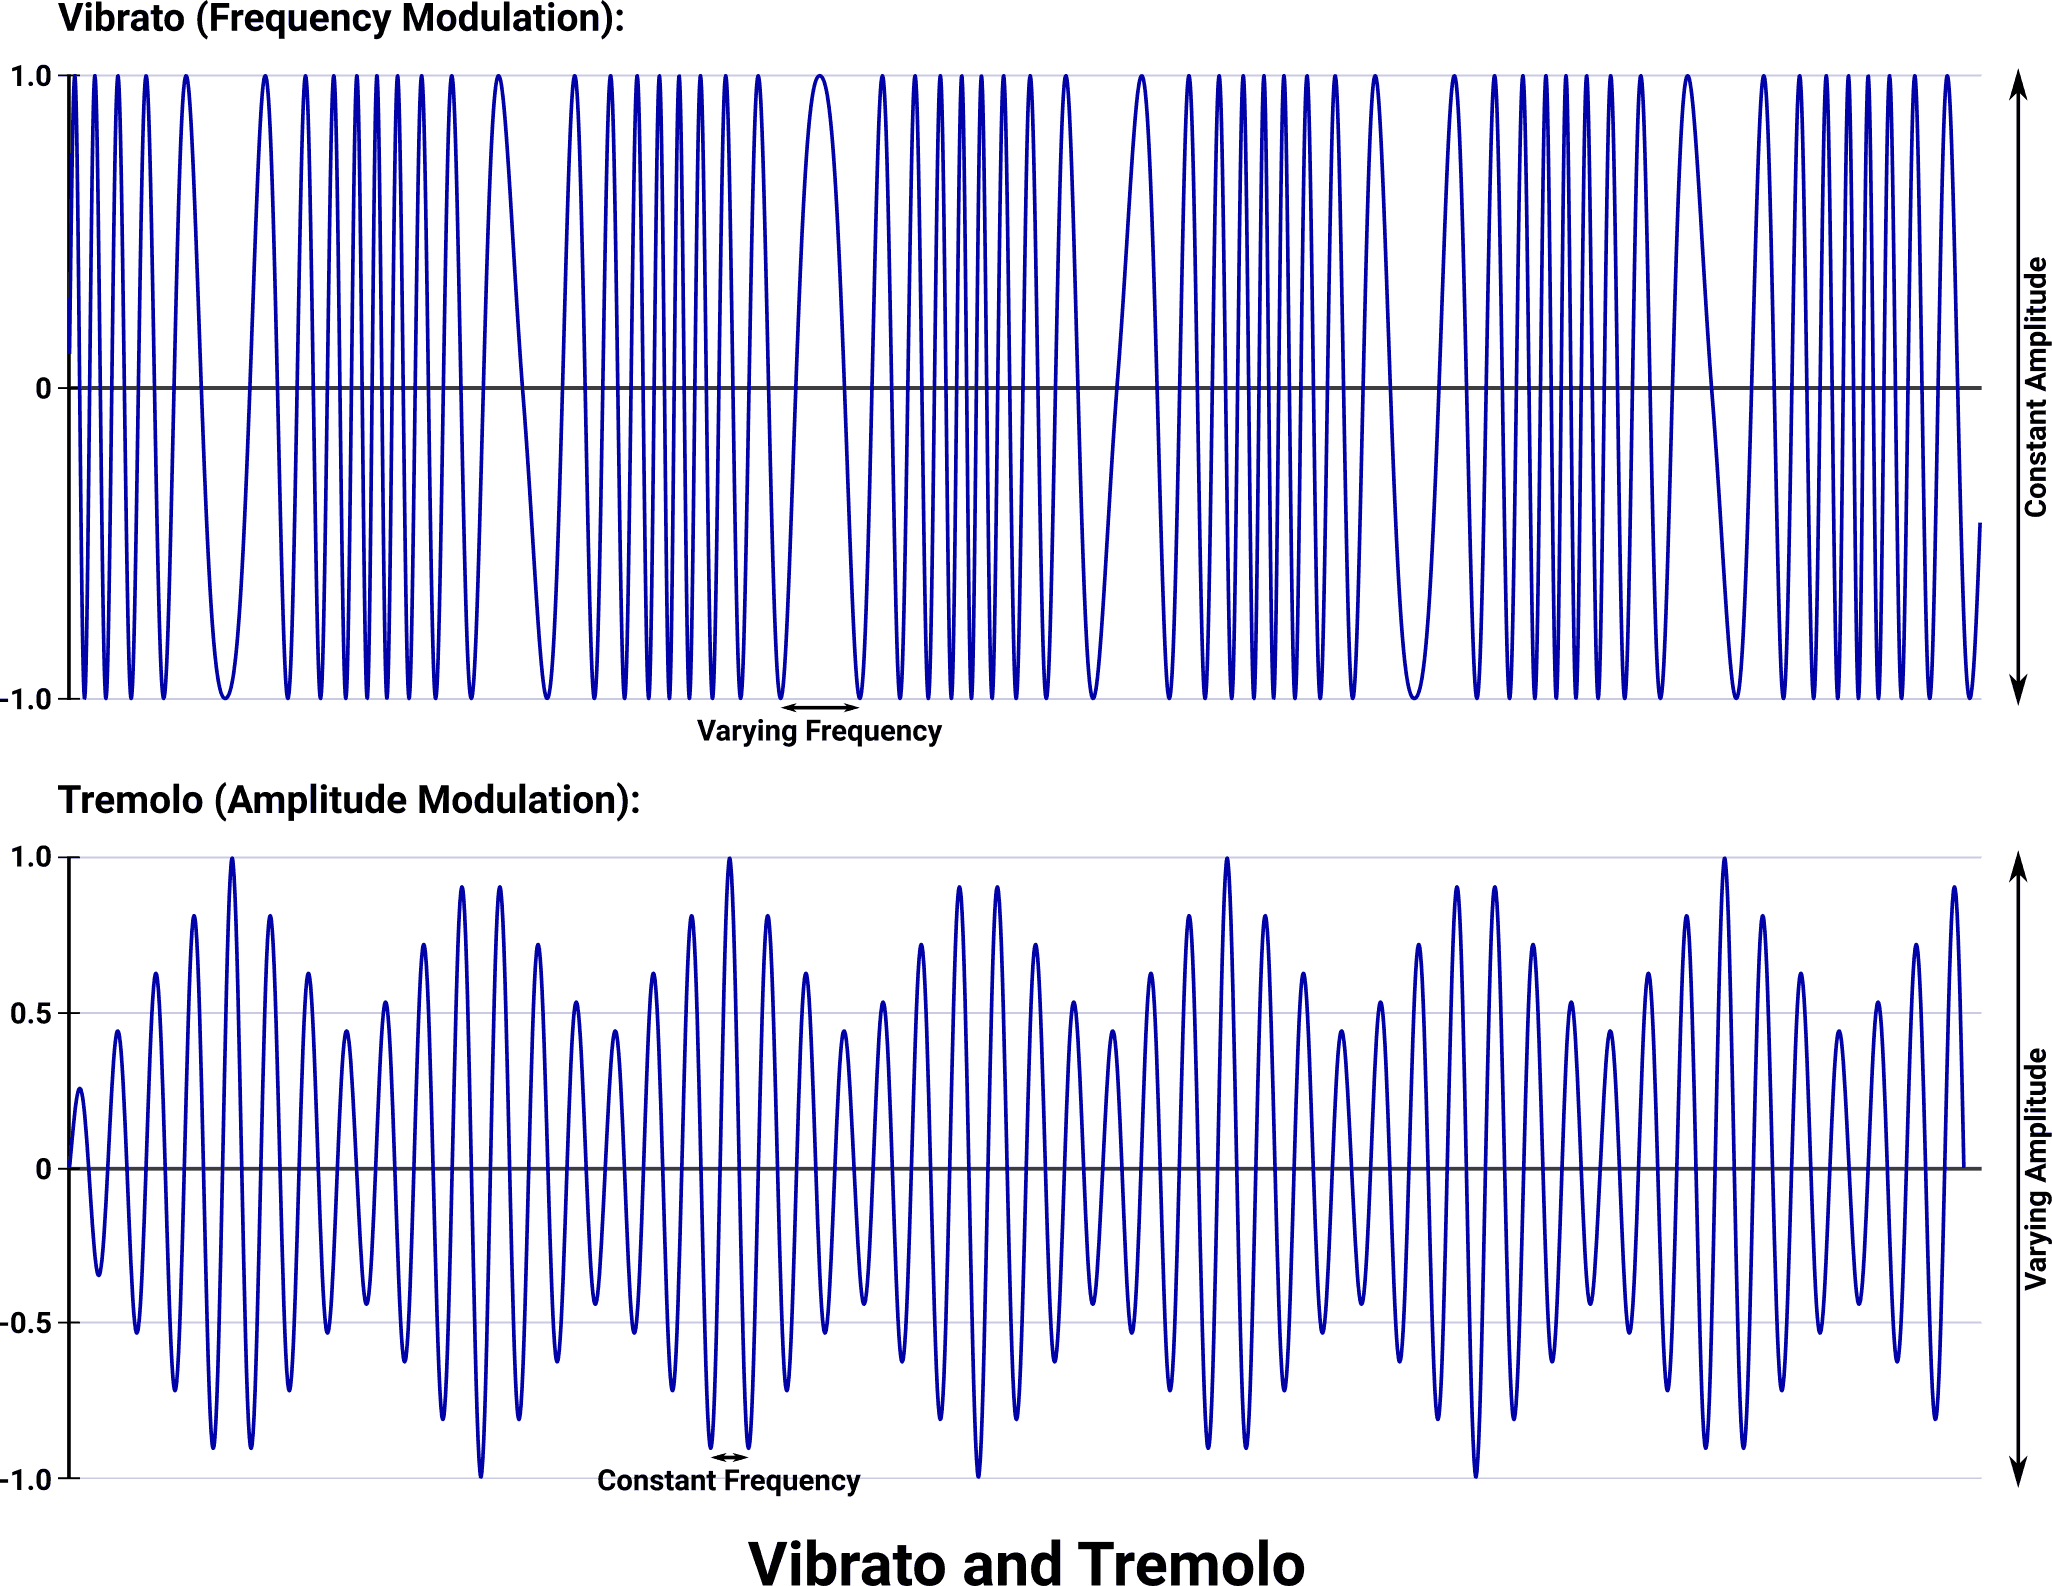 Shows the different effects of vibrato and tremolo on frequency and amplitude.